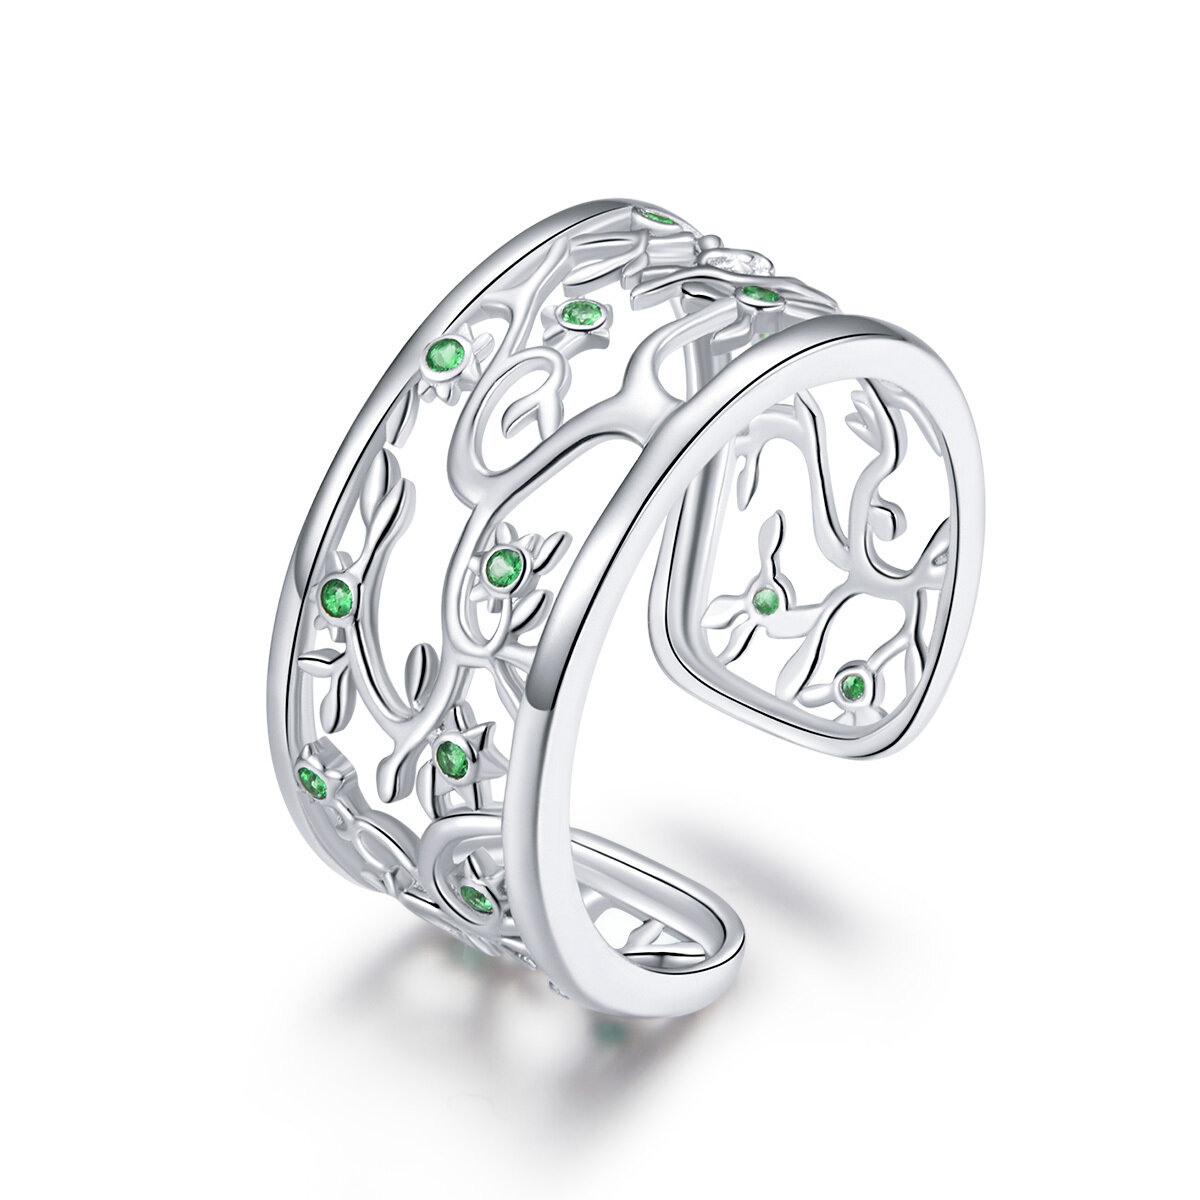 GemKing BSR125 tree of Life S925 Sterling Silver Ring